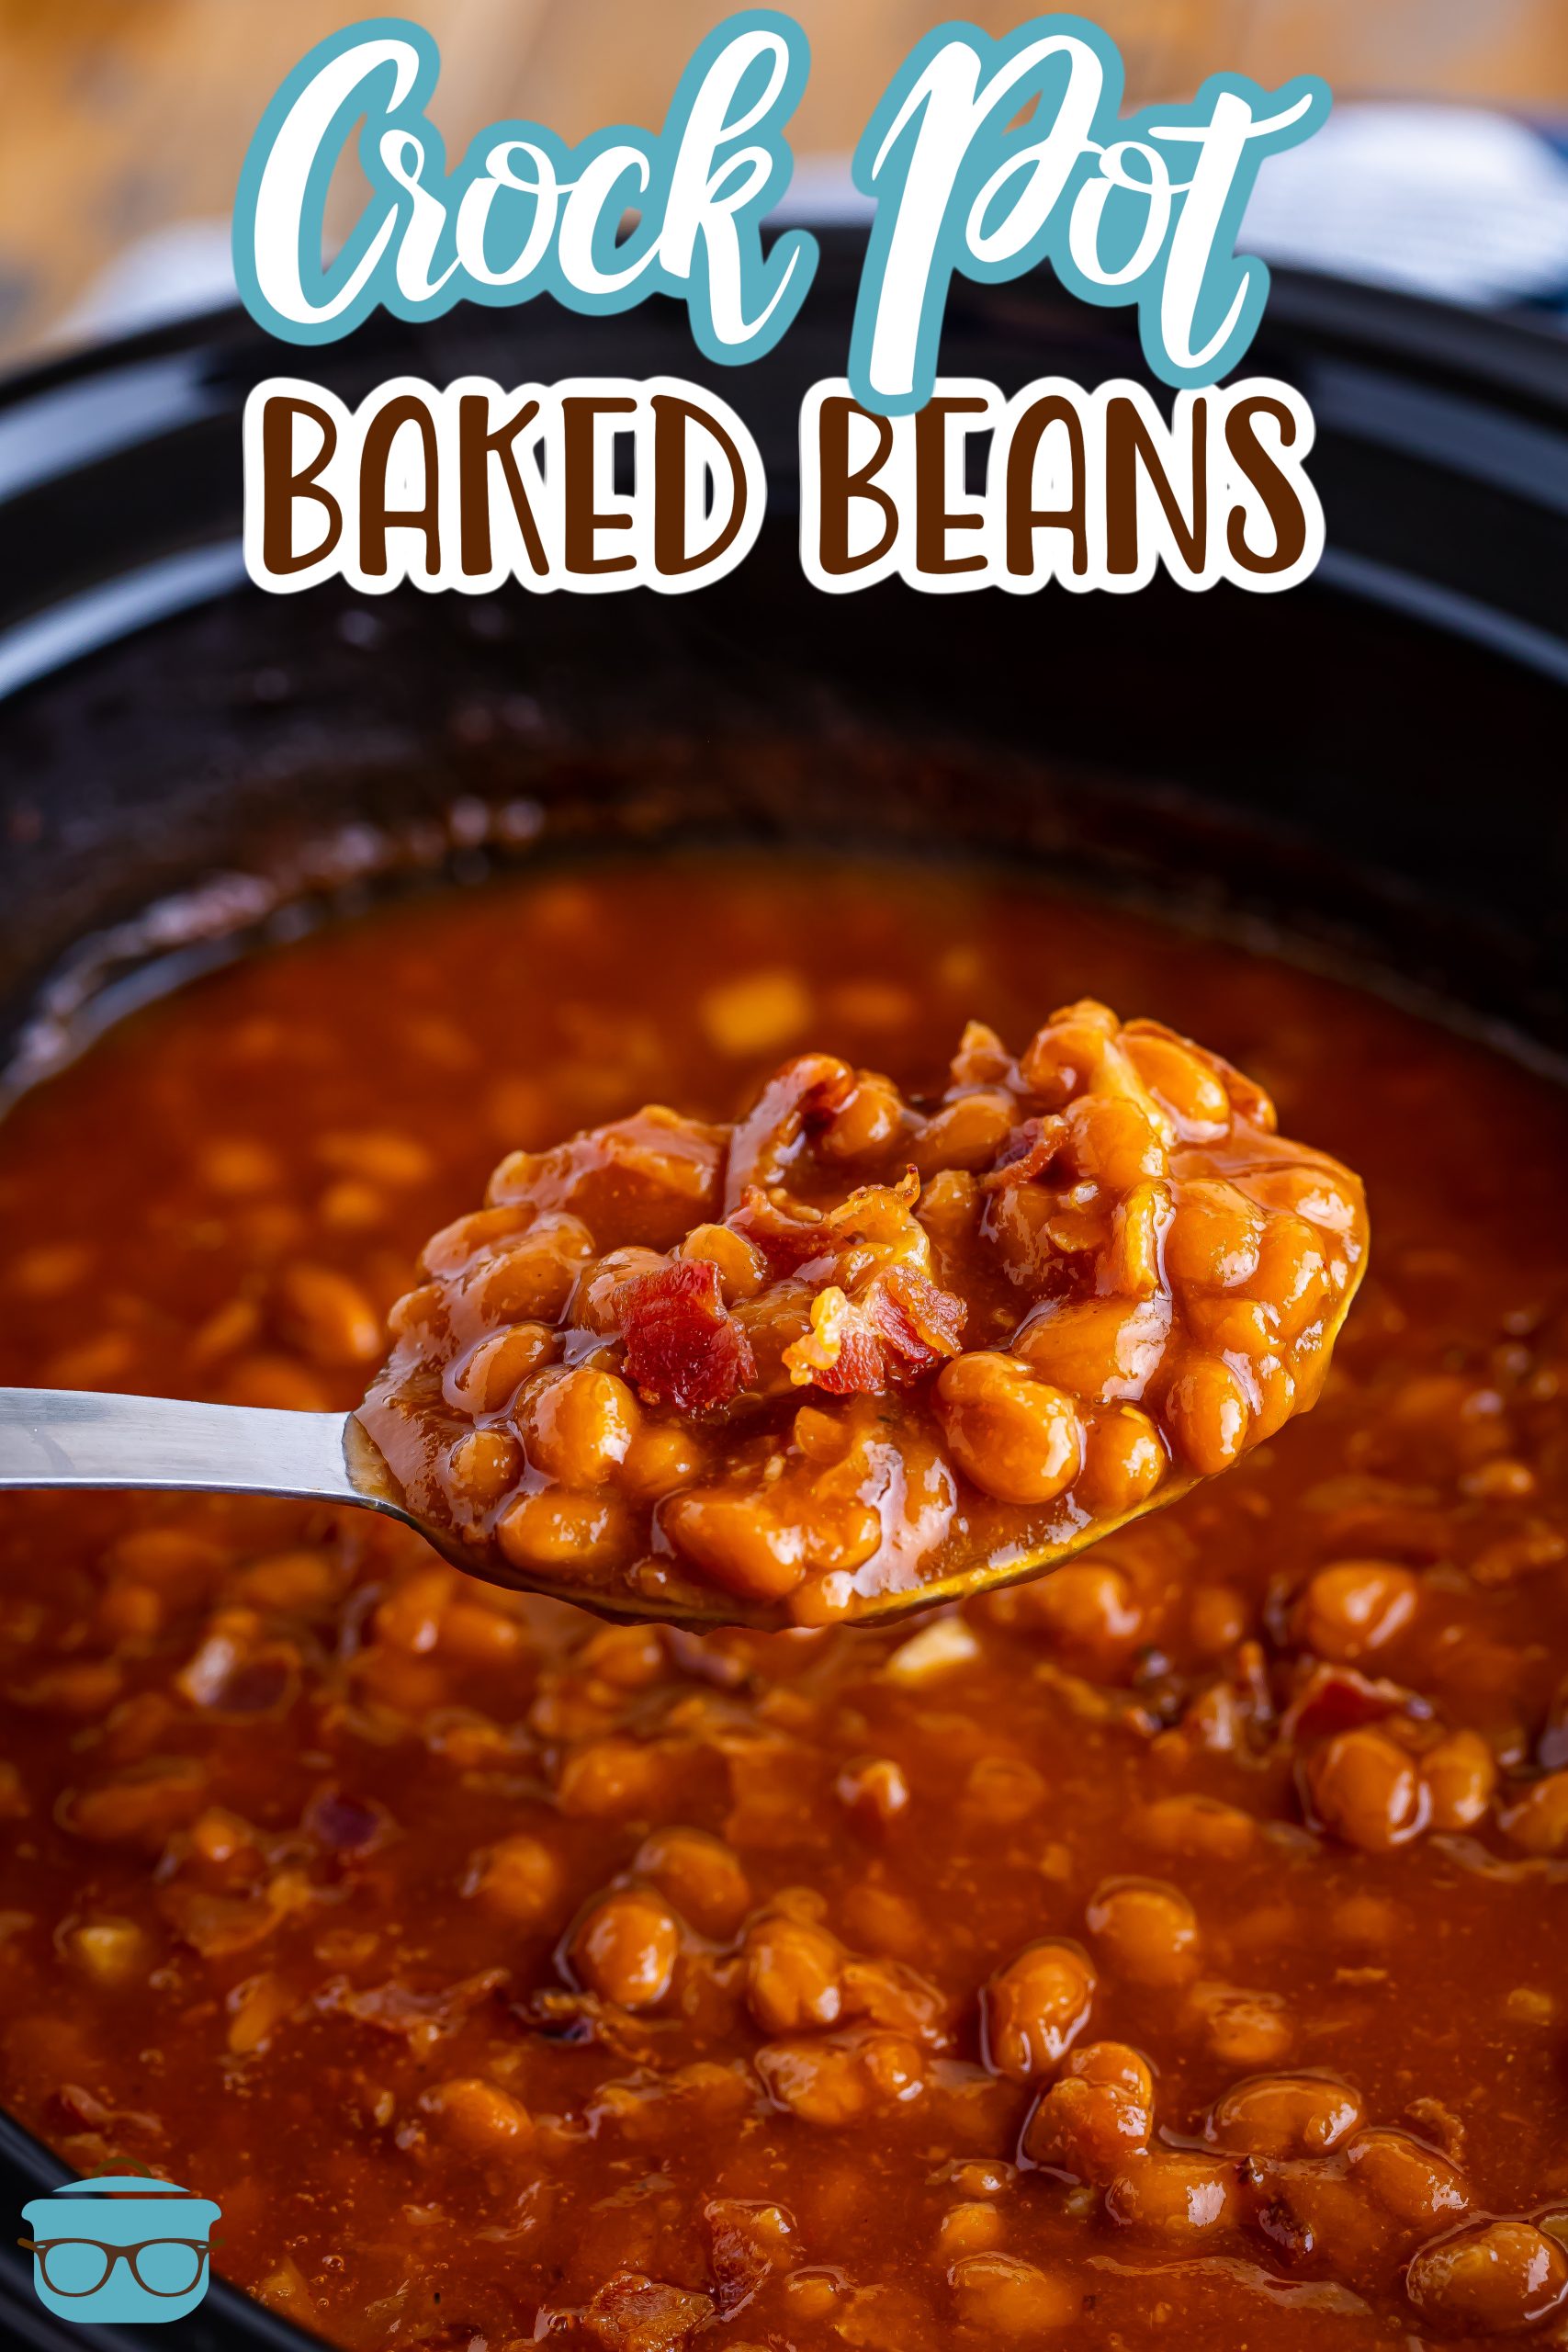 A spoon holding a scoop of Crock Pot Baked Beans over the rest of them.